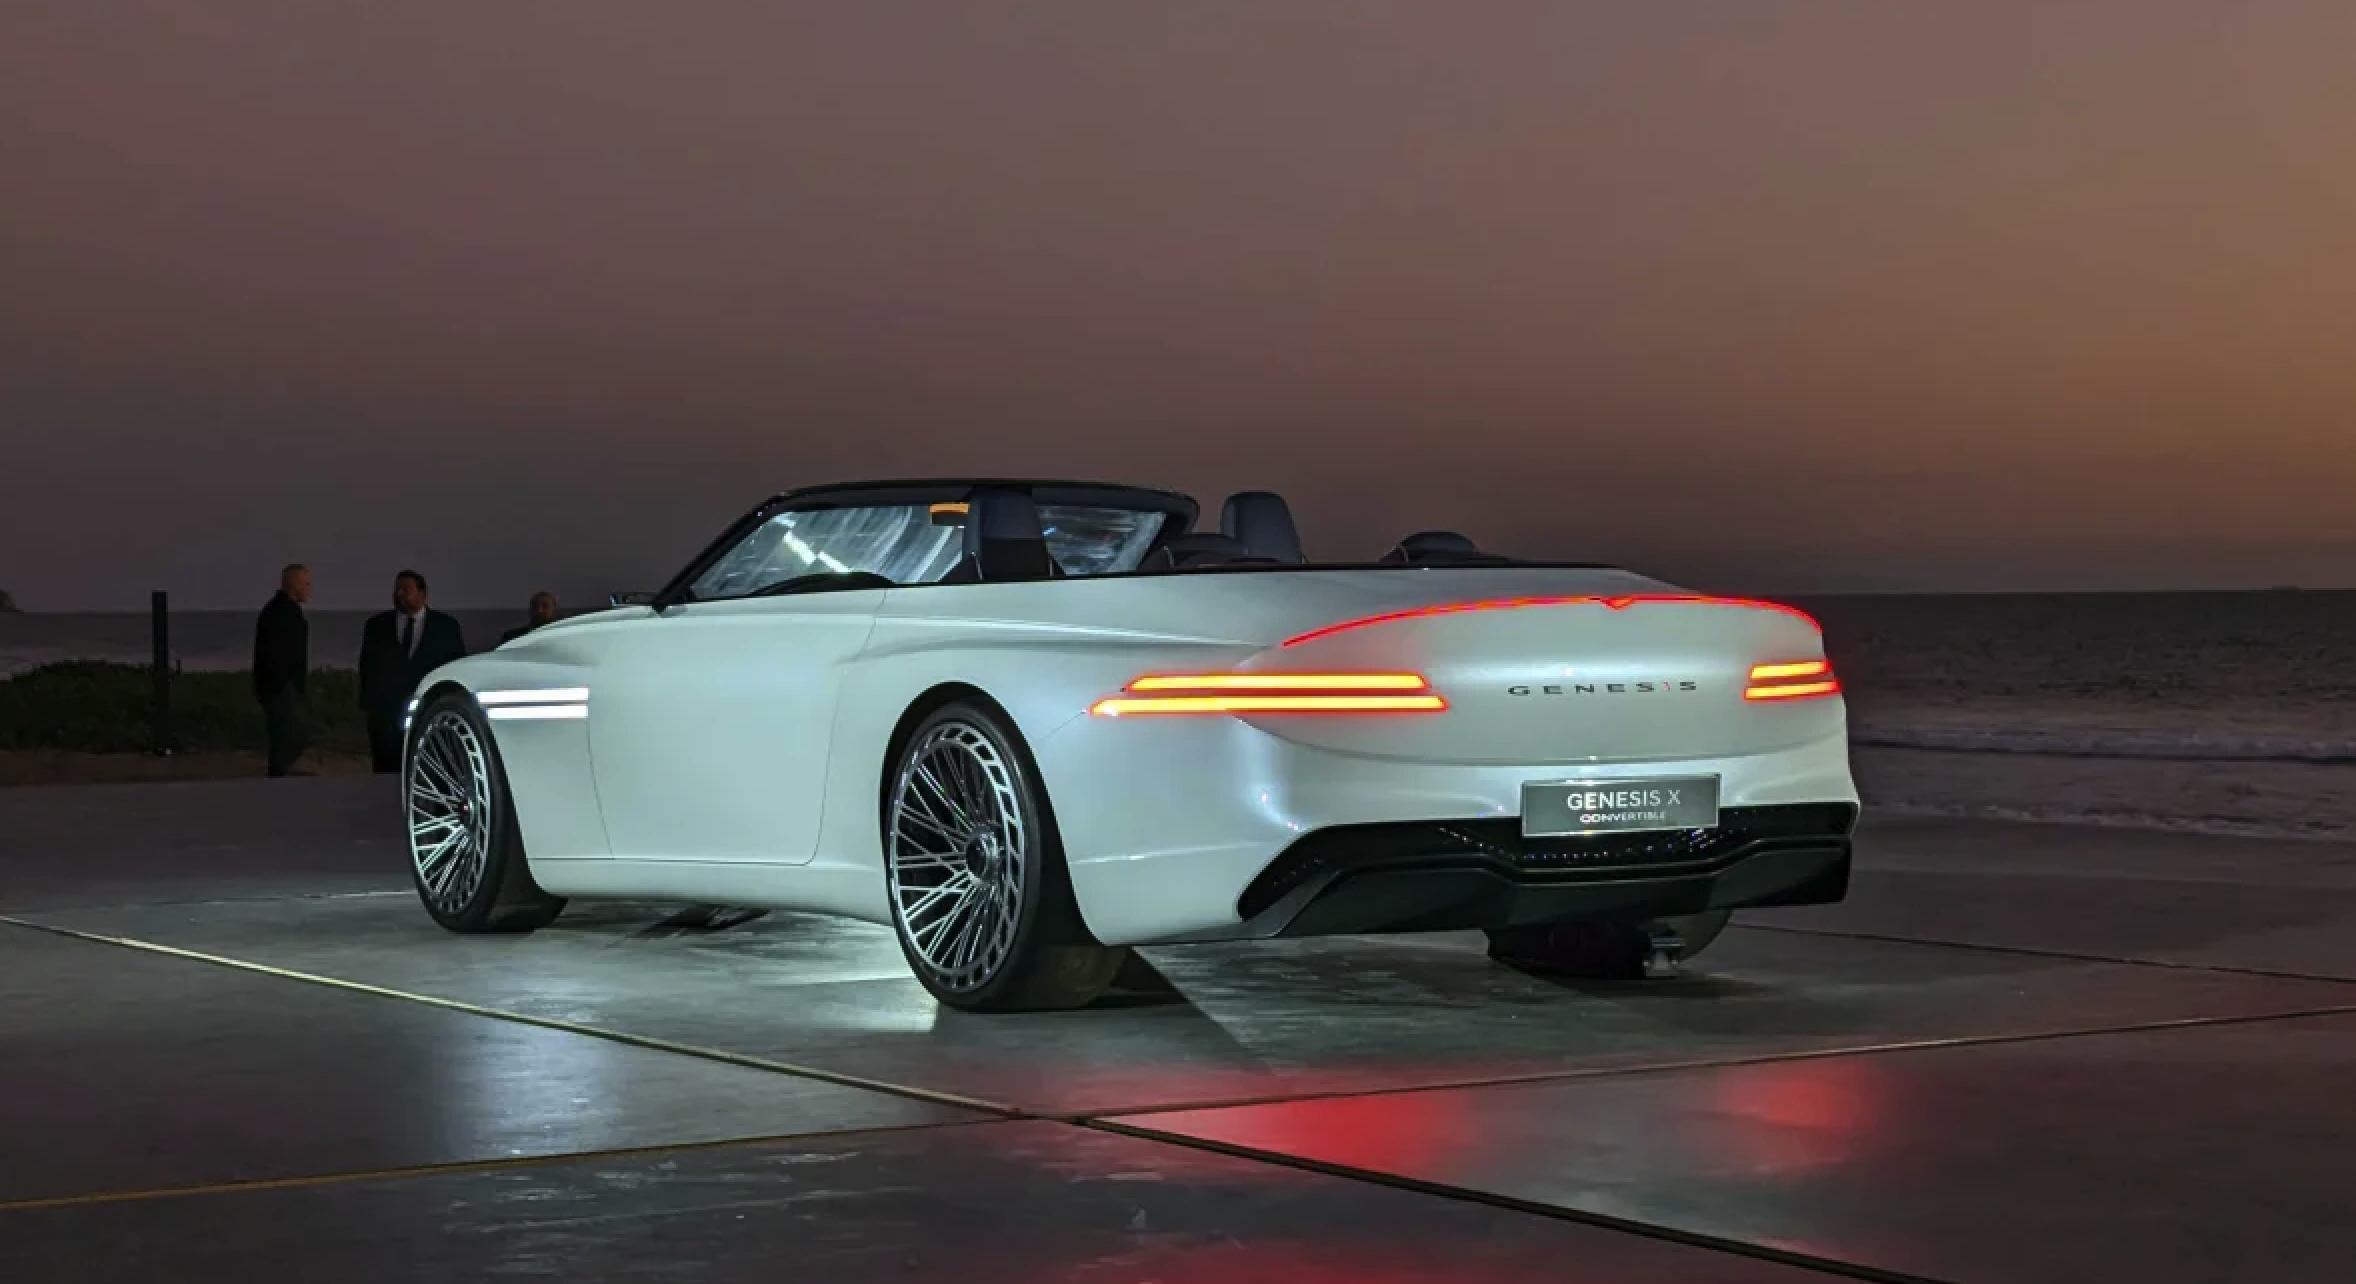 genesis x convertible almost ready for production & it looks amazing!